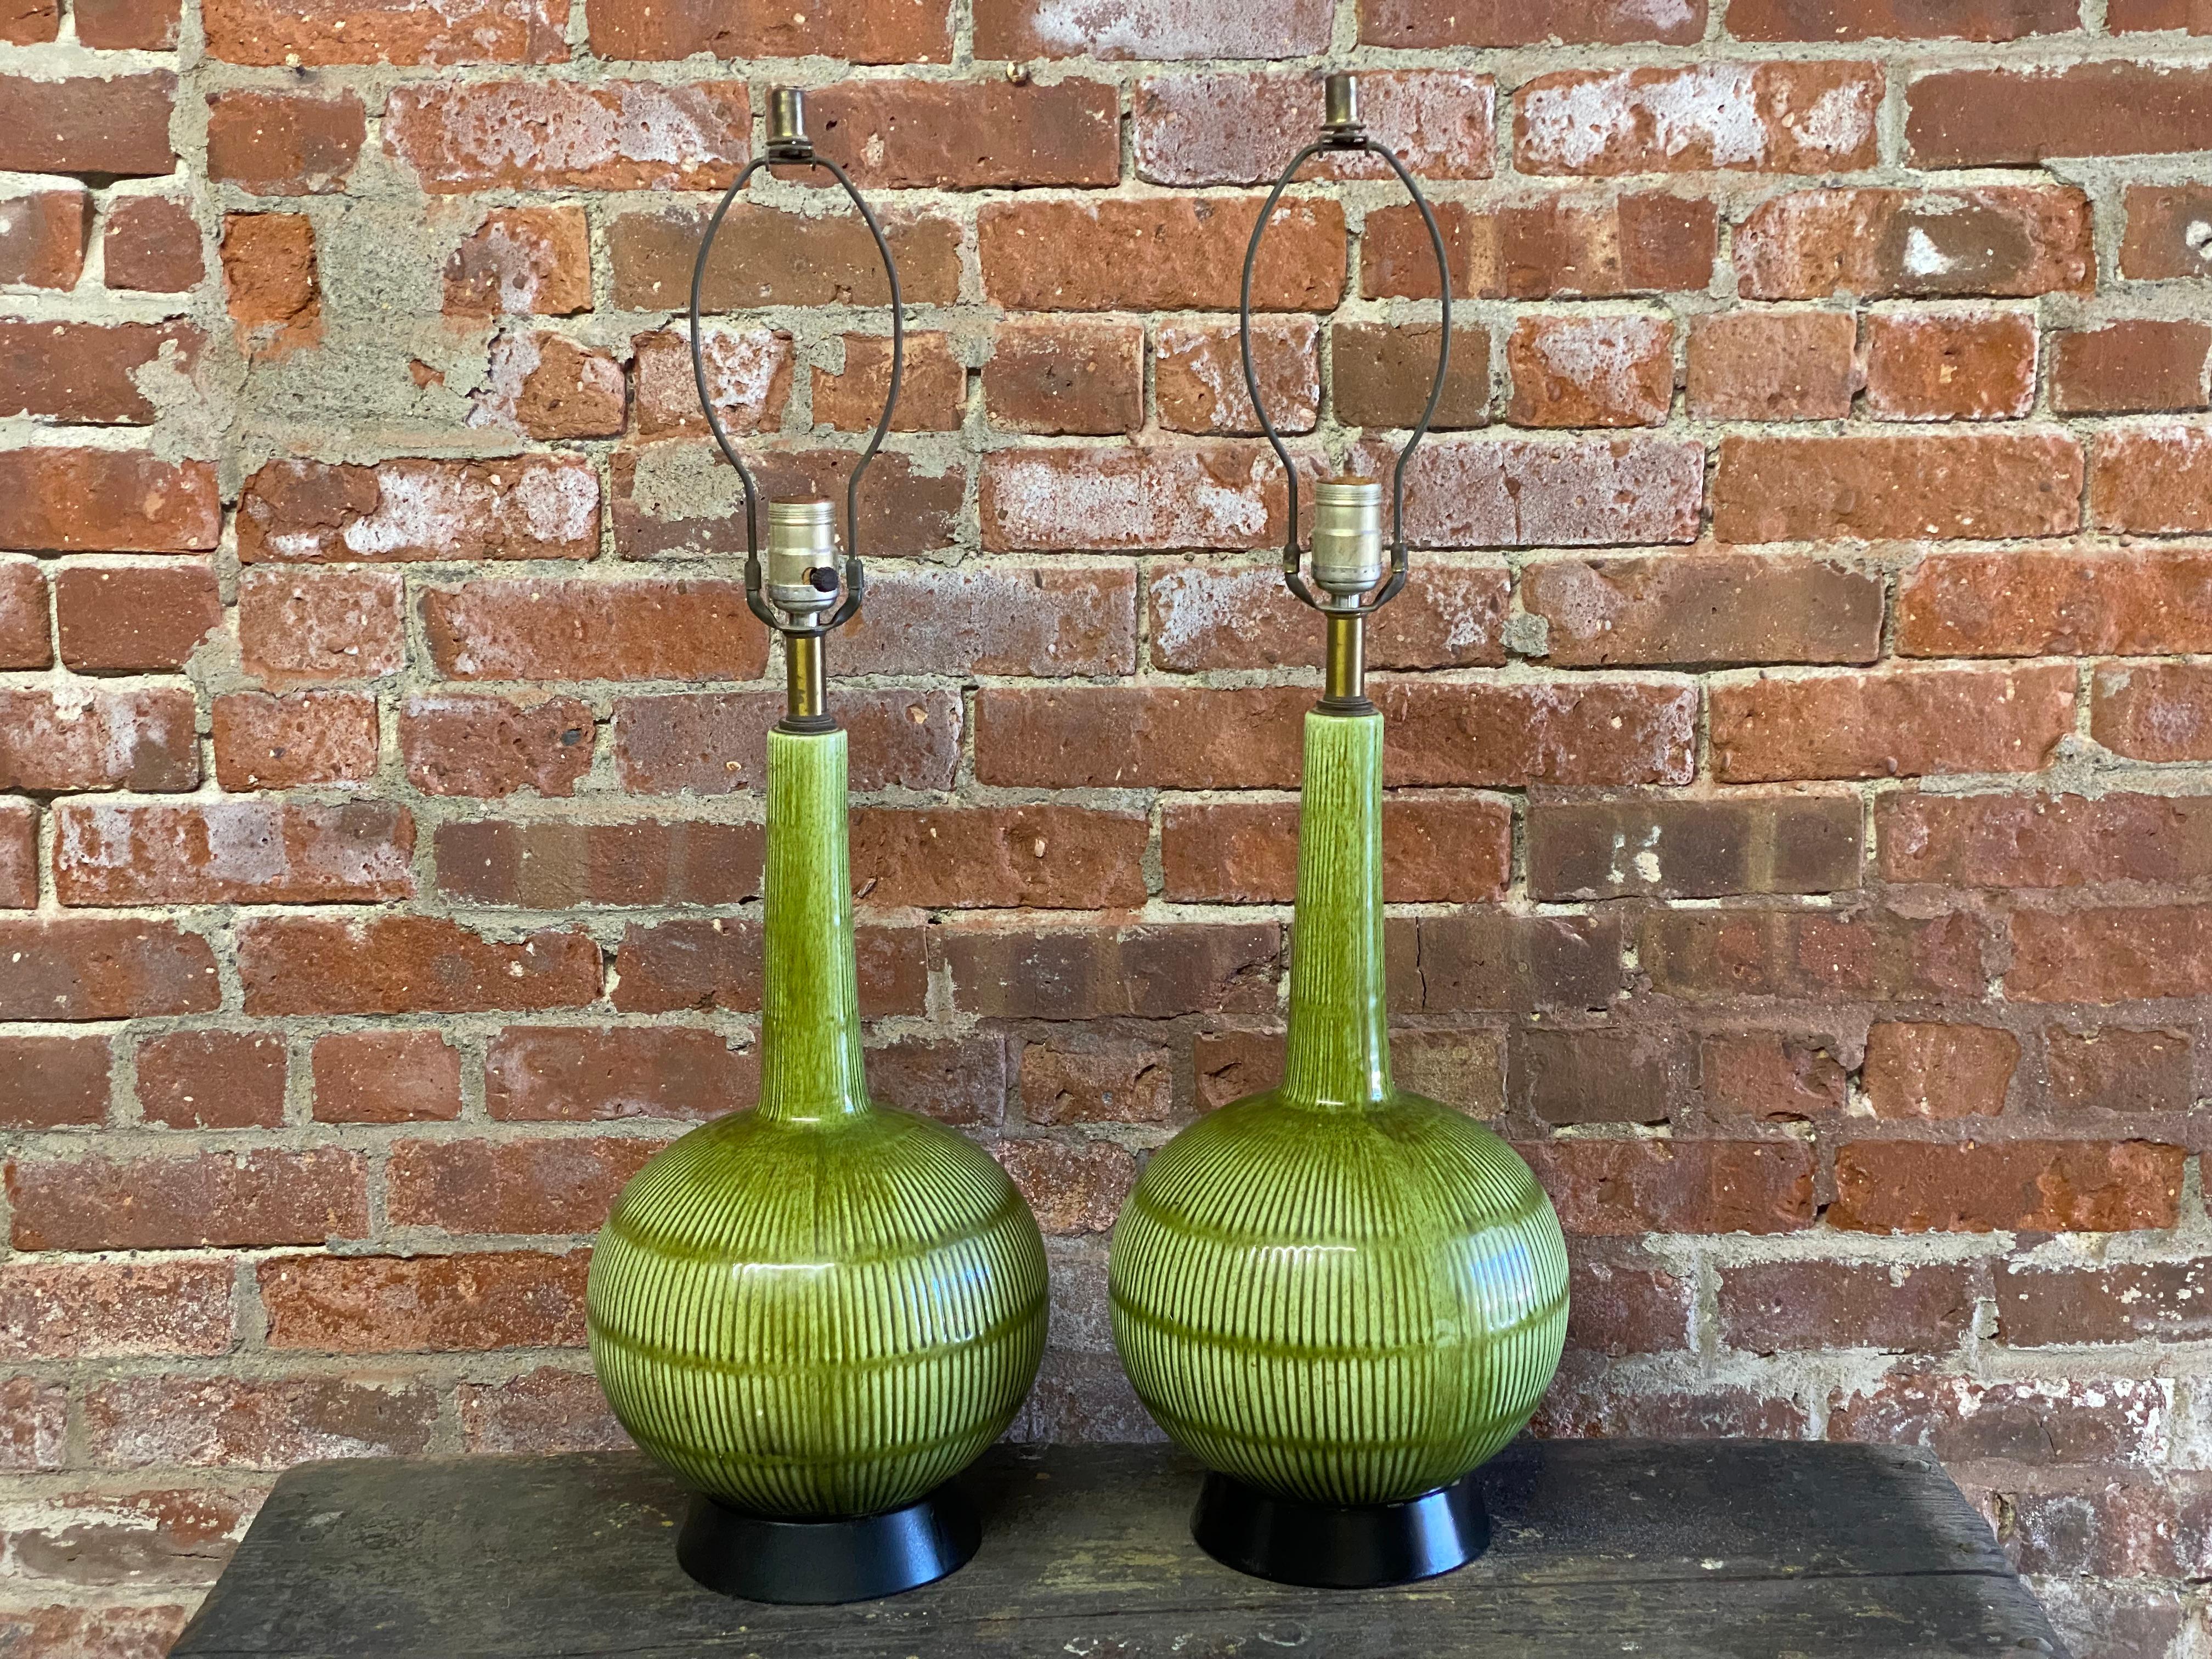 A fine pair of green glazed cast ceramic table lamps. Black metal bases. Asian inspired form. Circa 1960. Old working wiring. Good overall condition with no cracks, hairlines or restorations. Some light crazing and glaze pops. The bases look like